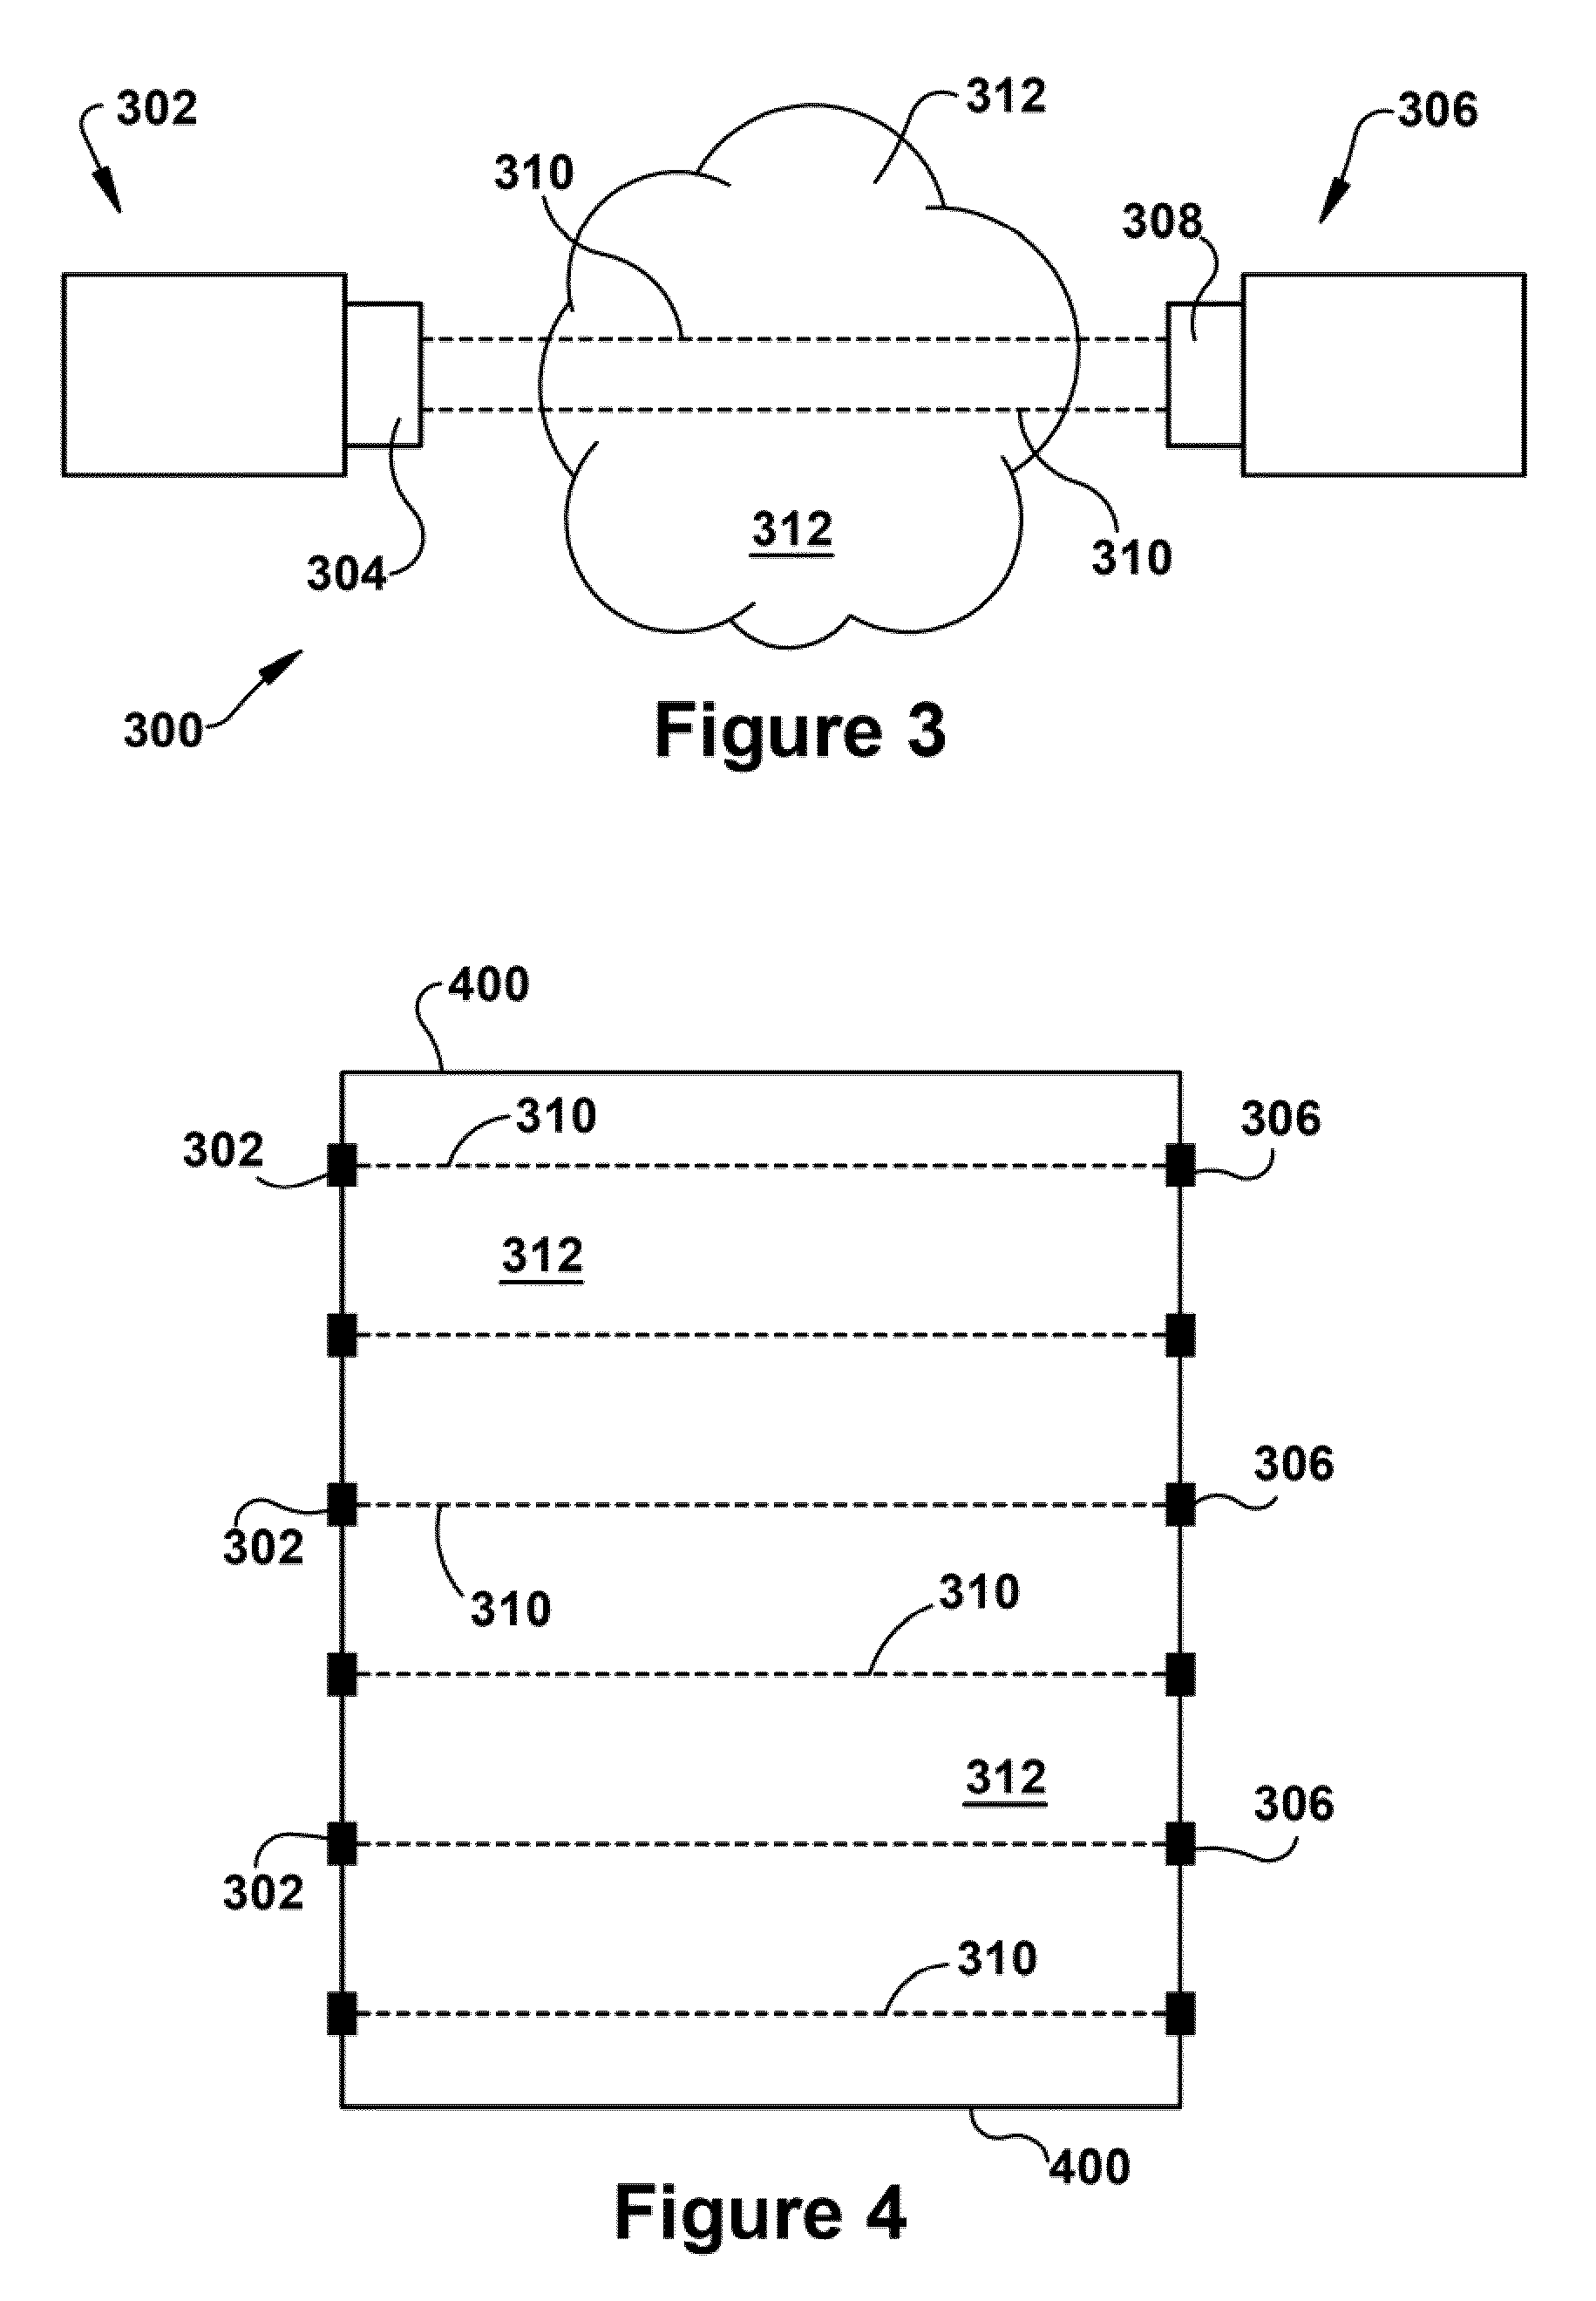 Systems and apparatus relating to the monitoring and/or controlling of selective catalytic reduction processes